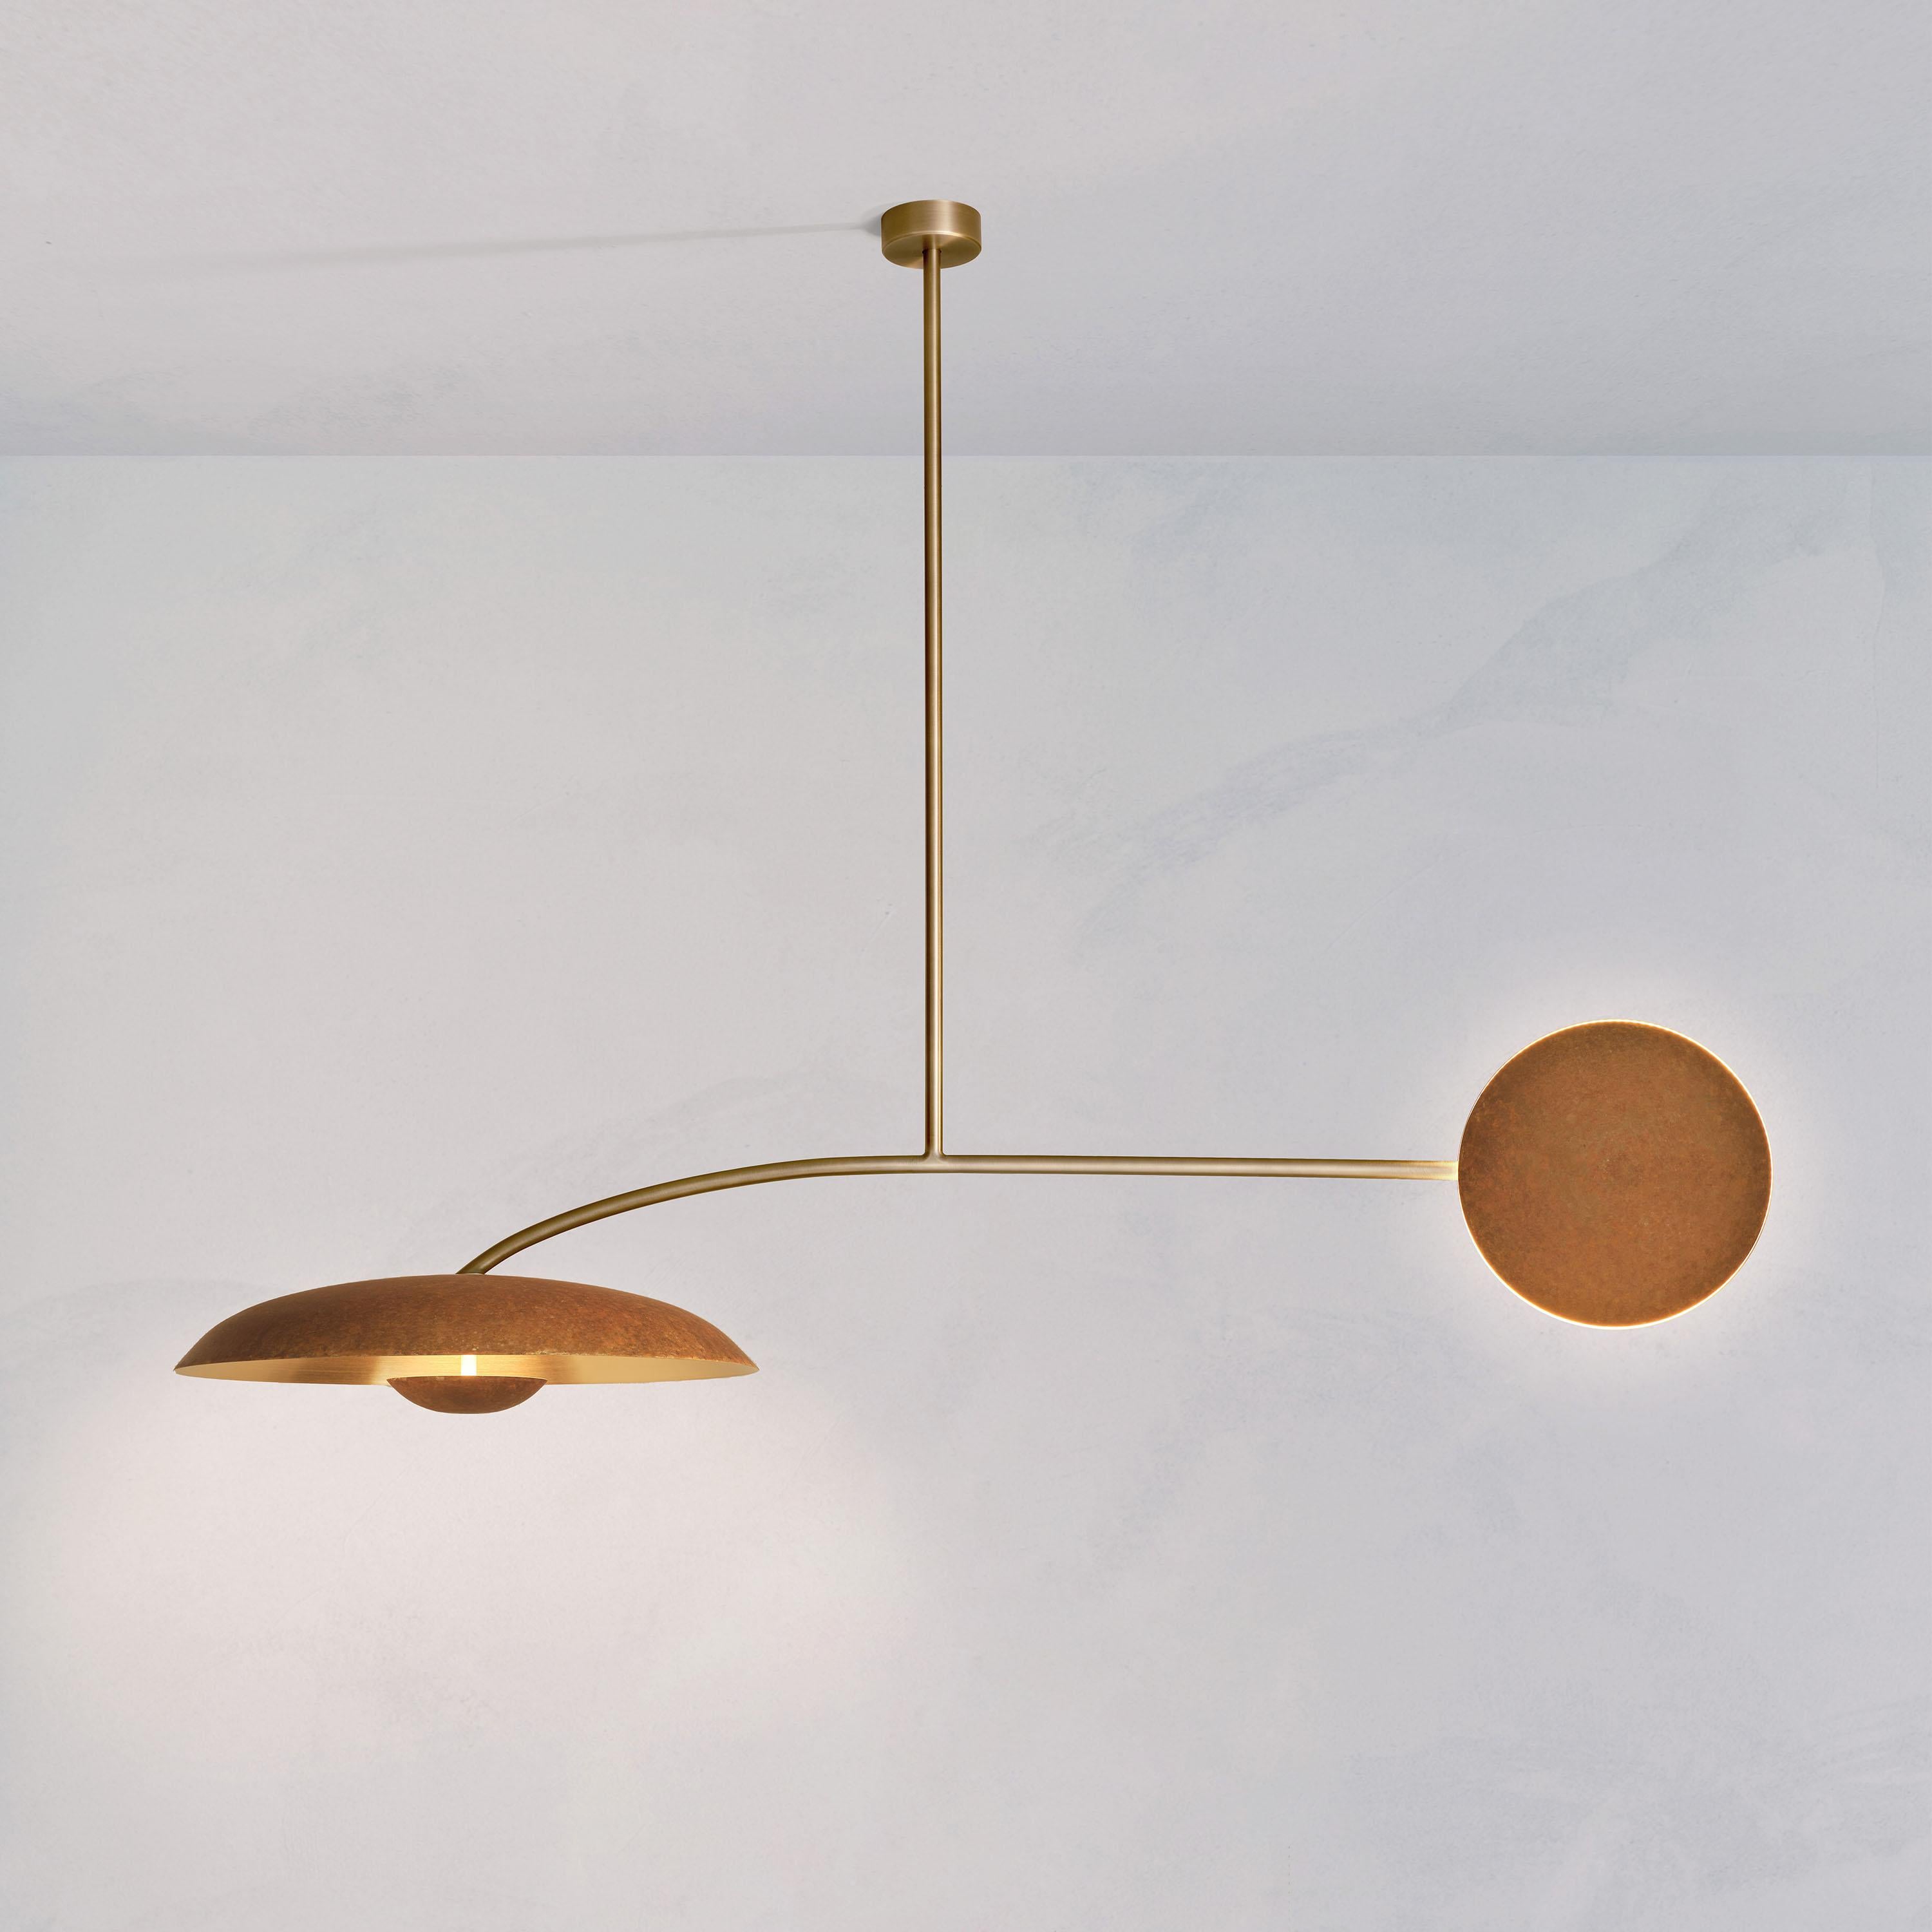 Two lighting components harmoniously balanced, framing this unique ceiling light. Composed by patinated brass plates and finely brushed bronze framework, the Orbit Solo ceiling light is softly illuminated with LED elements from within.
 
This